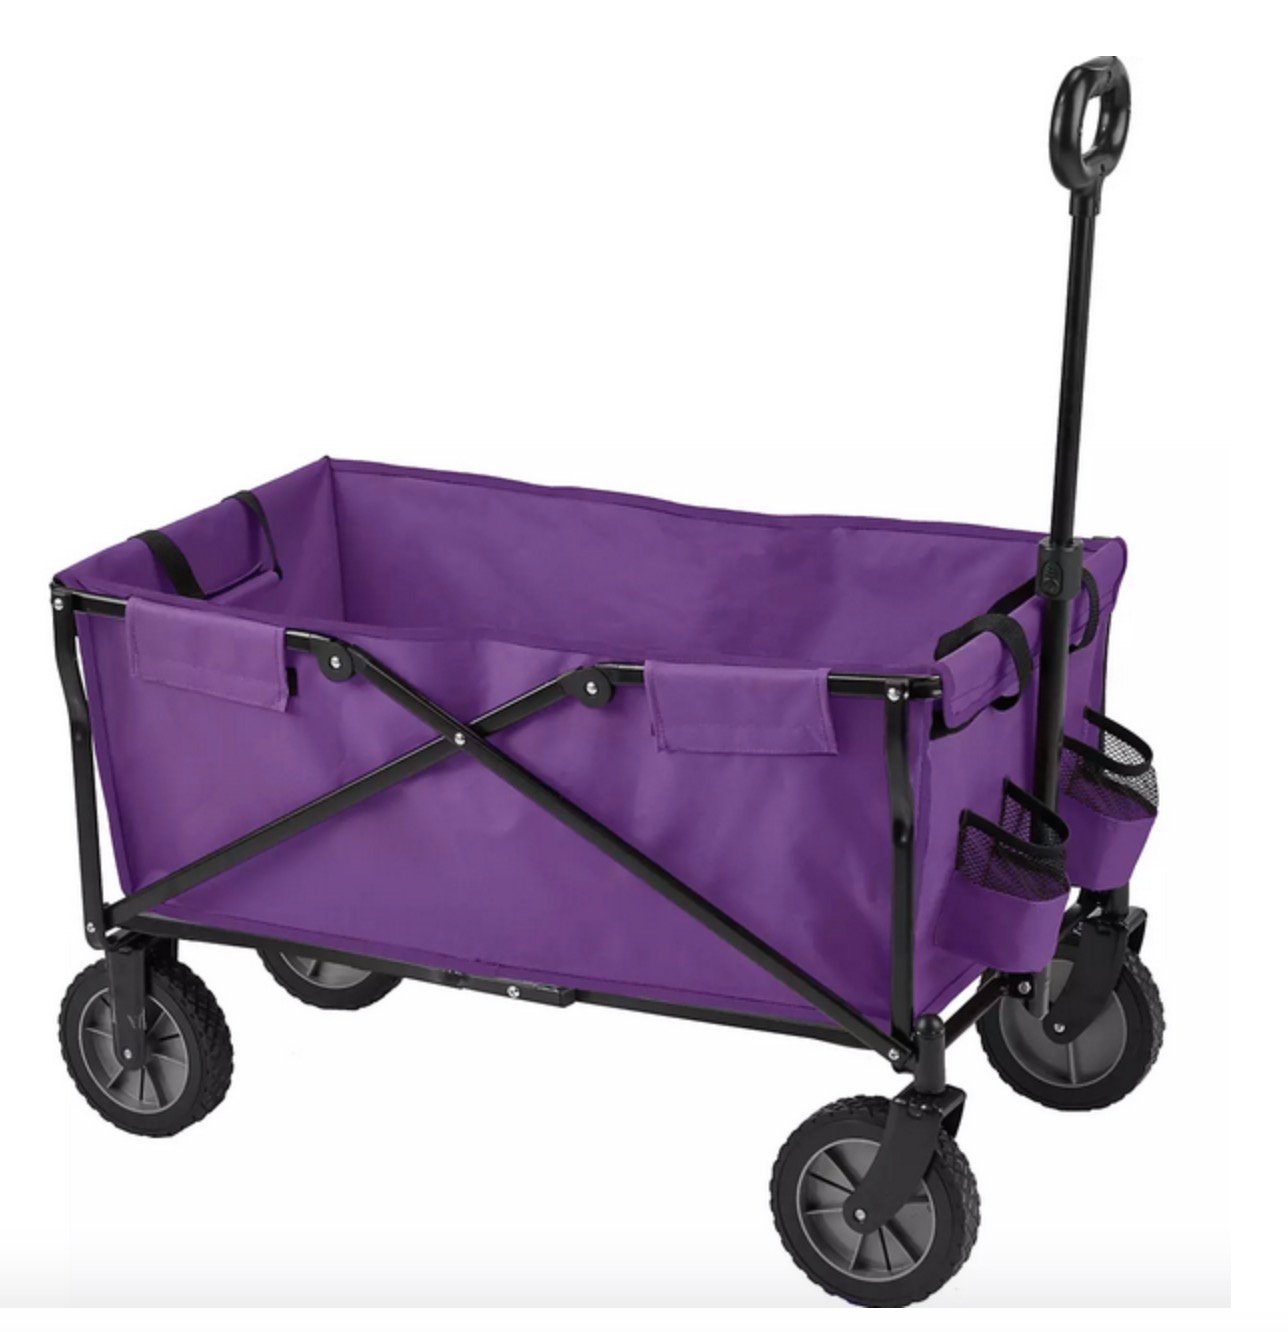 *HOT* Academy Sports activities Folding Sports activities Wagon solely $39.99, plus extra!!